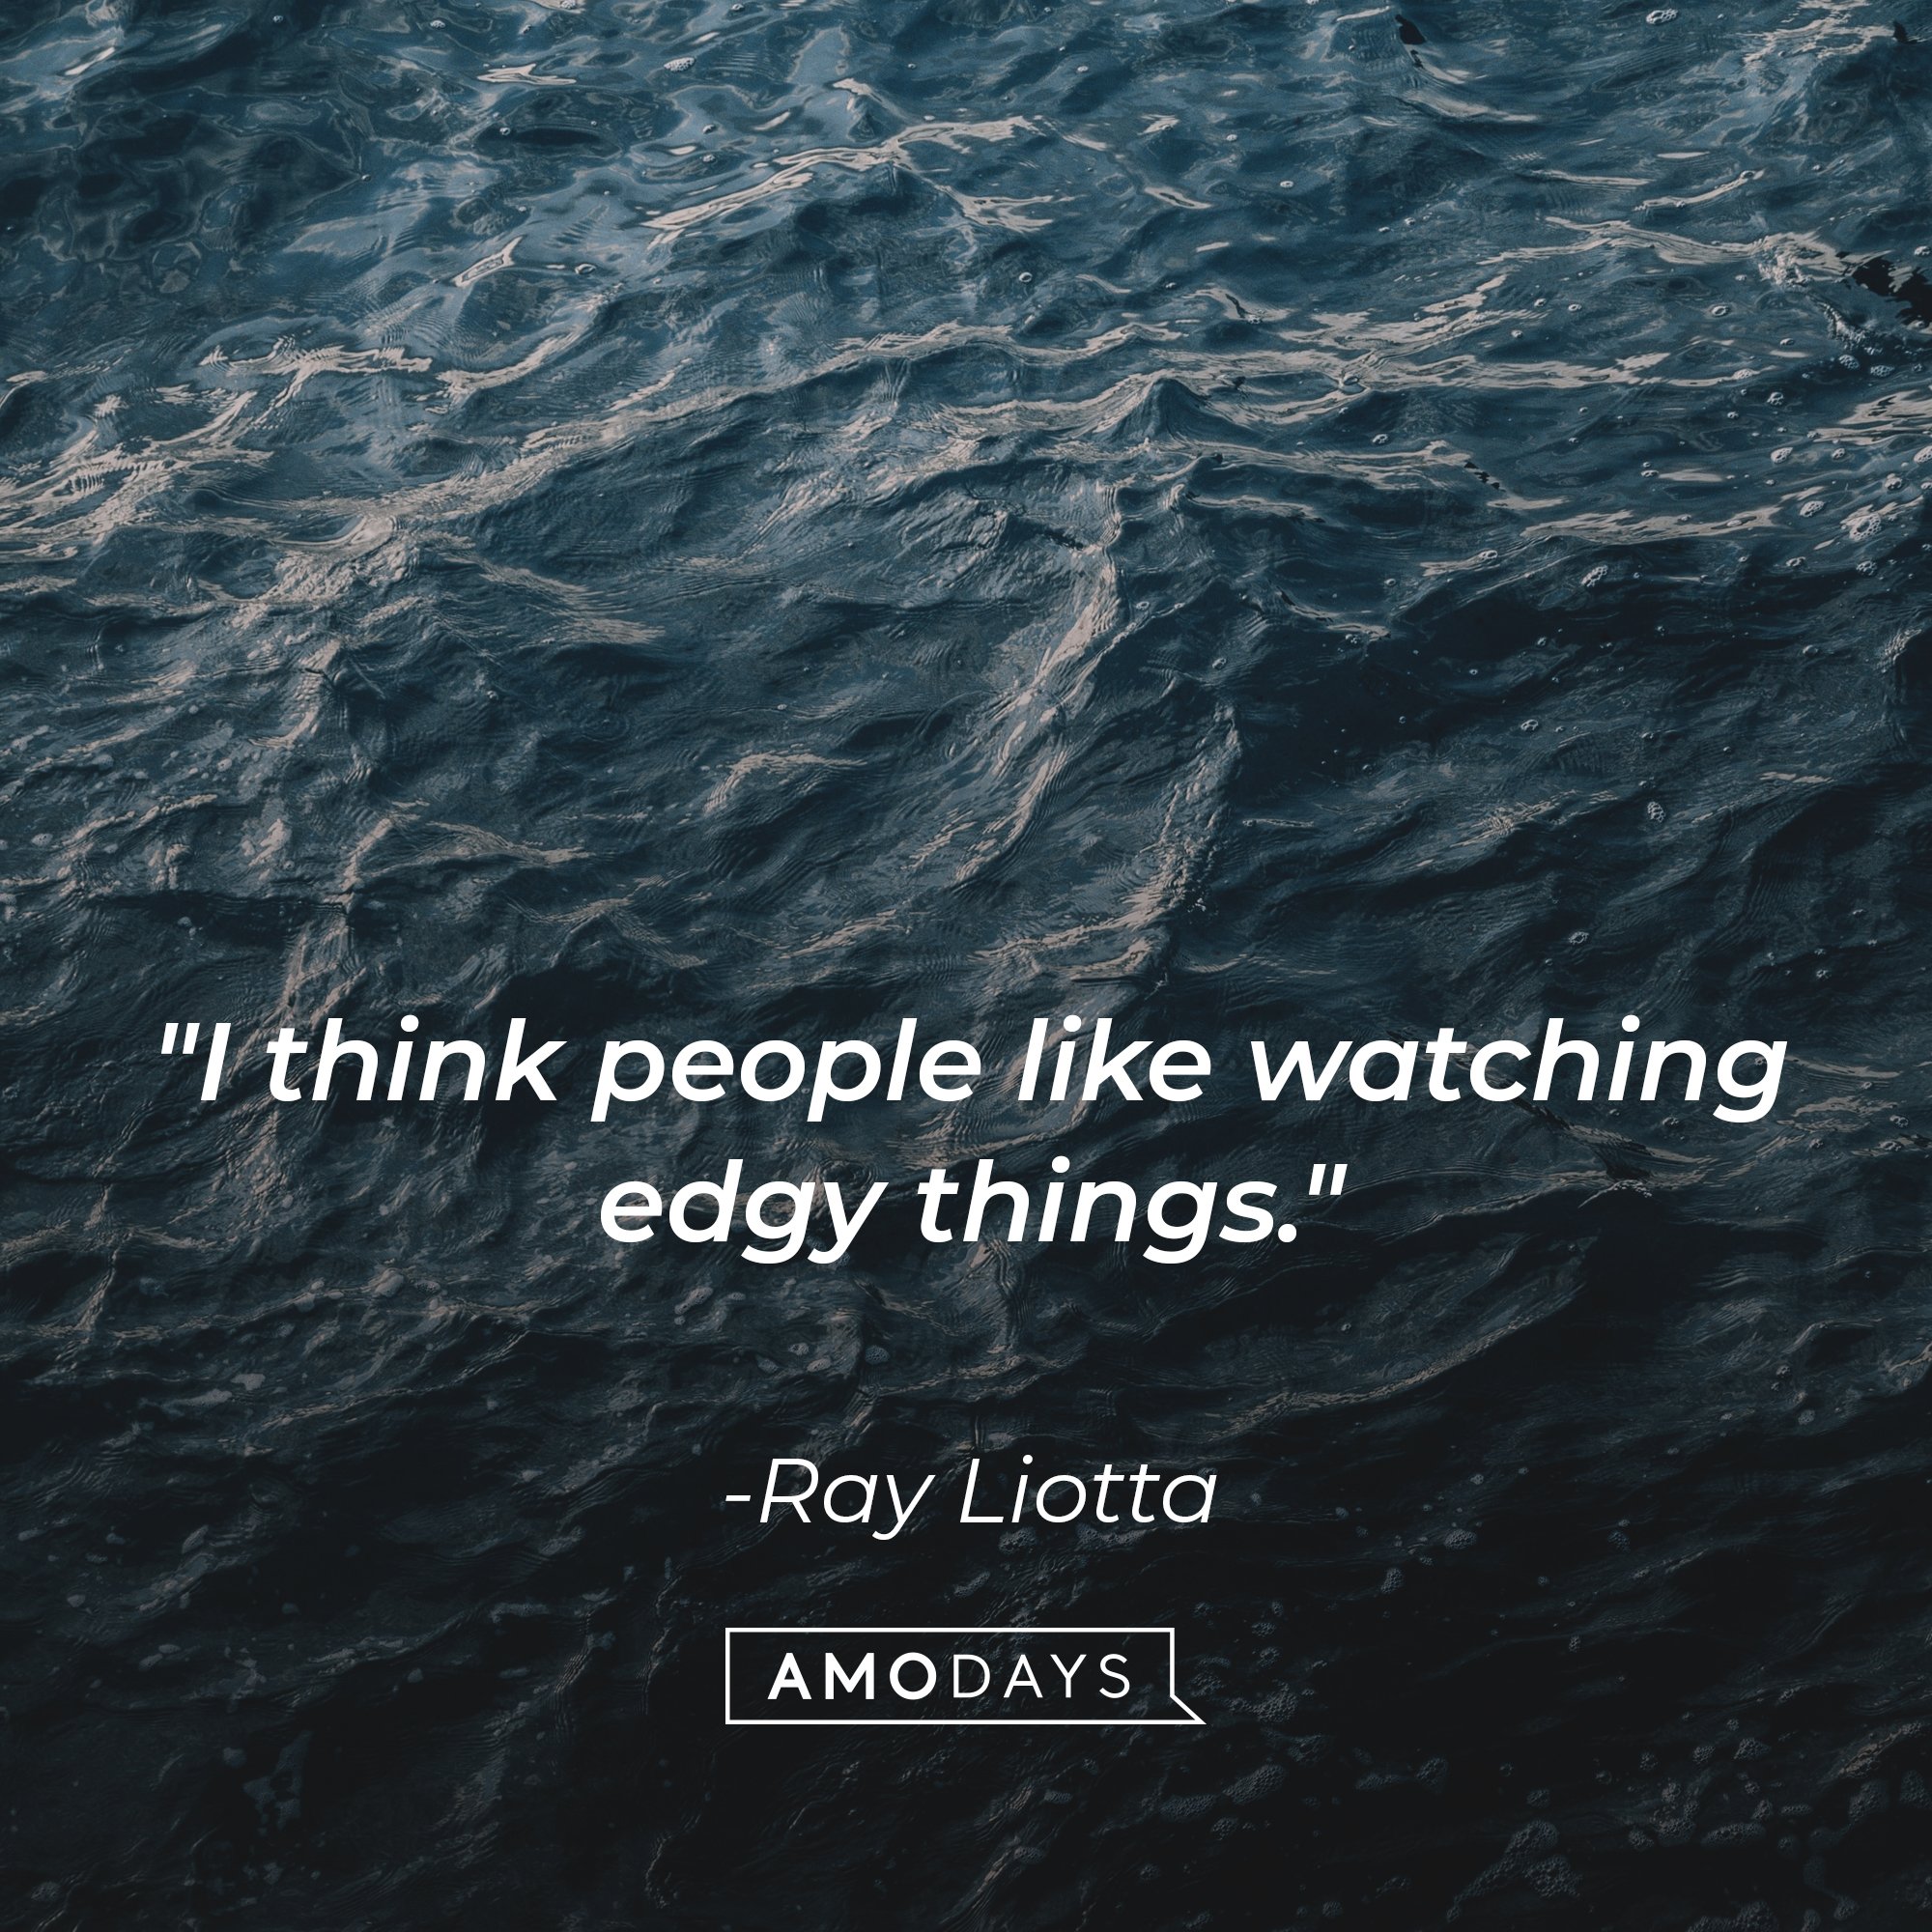 Ray Liotta’s quote: "I think people like watching edgy things." | Image: AmoDays